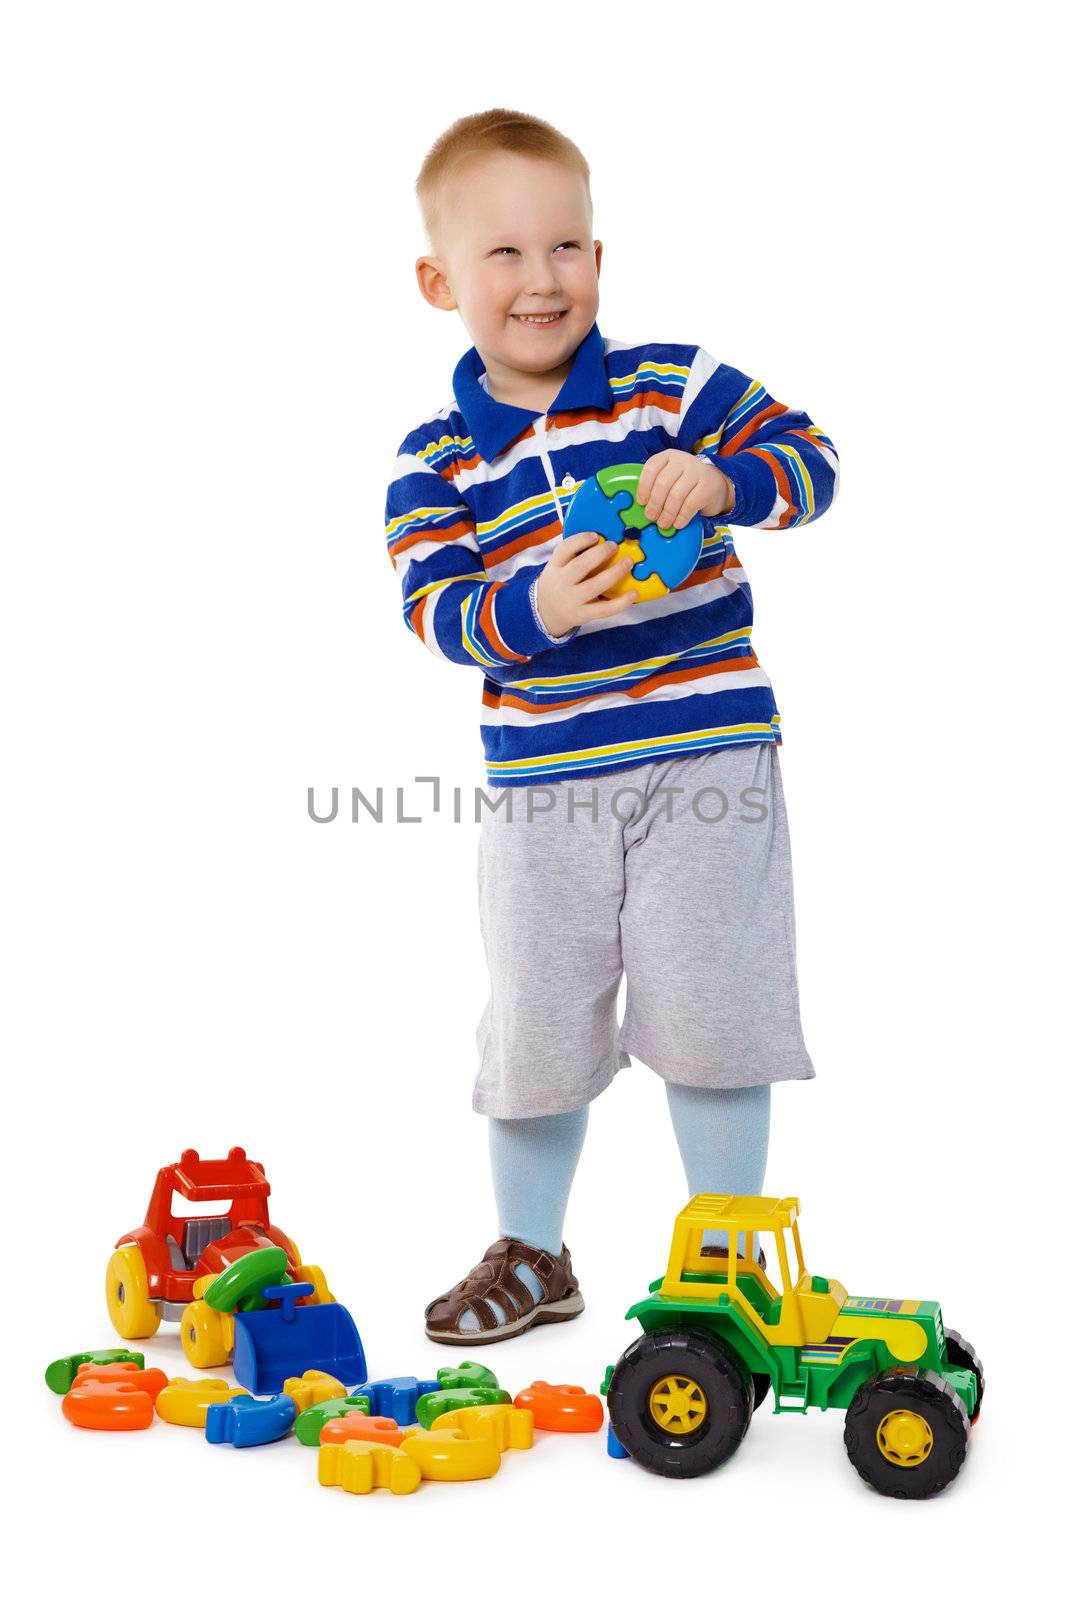 Child playing with toys on white background by pzaxe